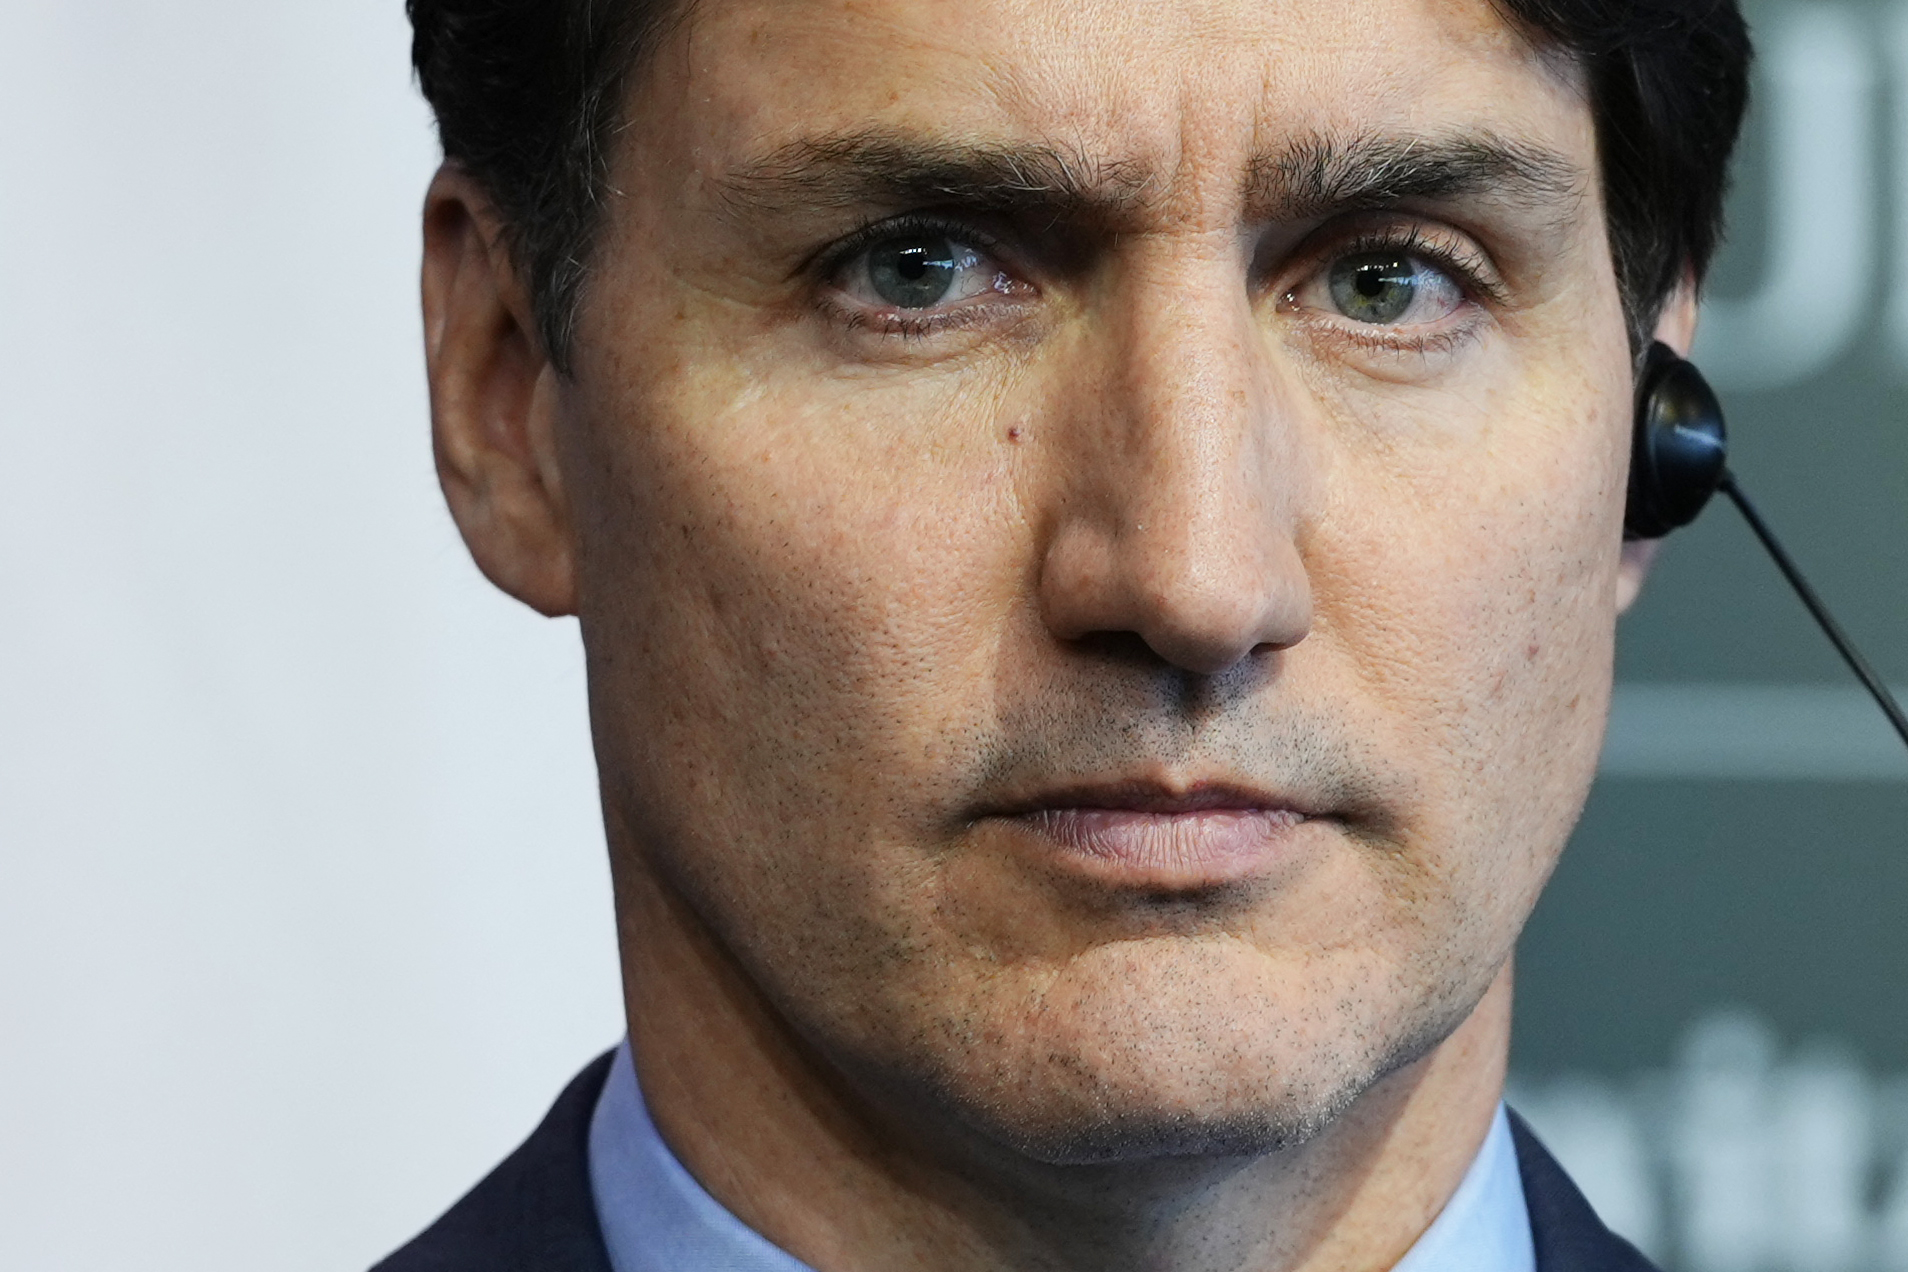 An overwhelming majority of Canadians want Trudeau to step down poll finds